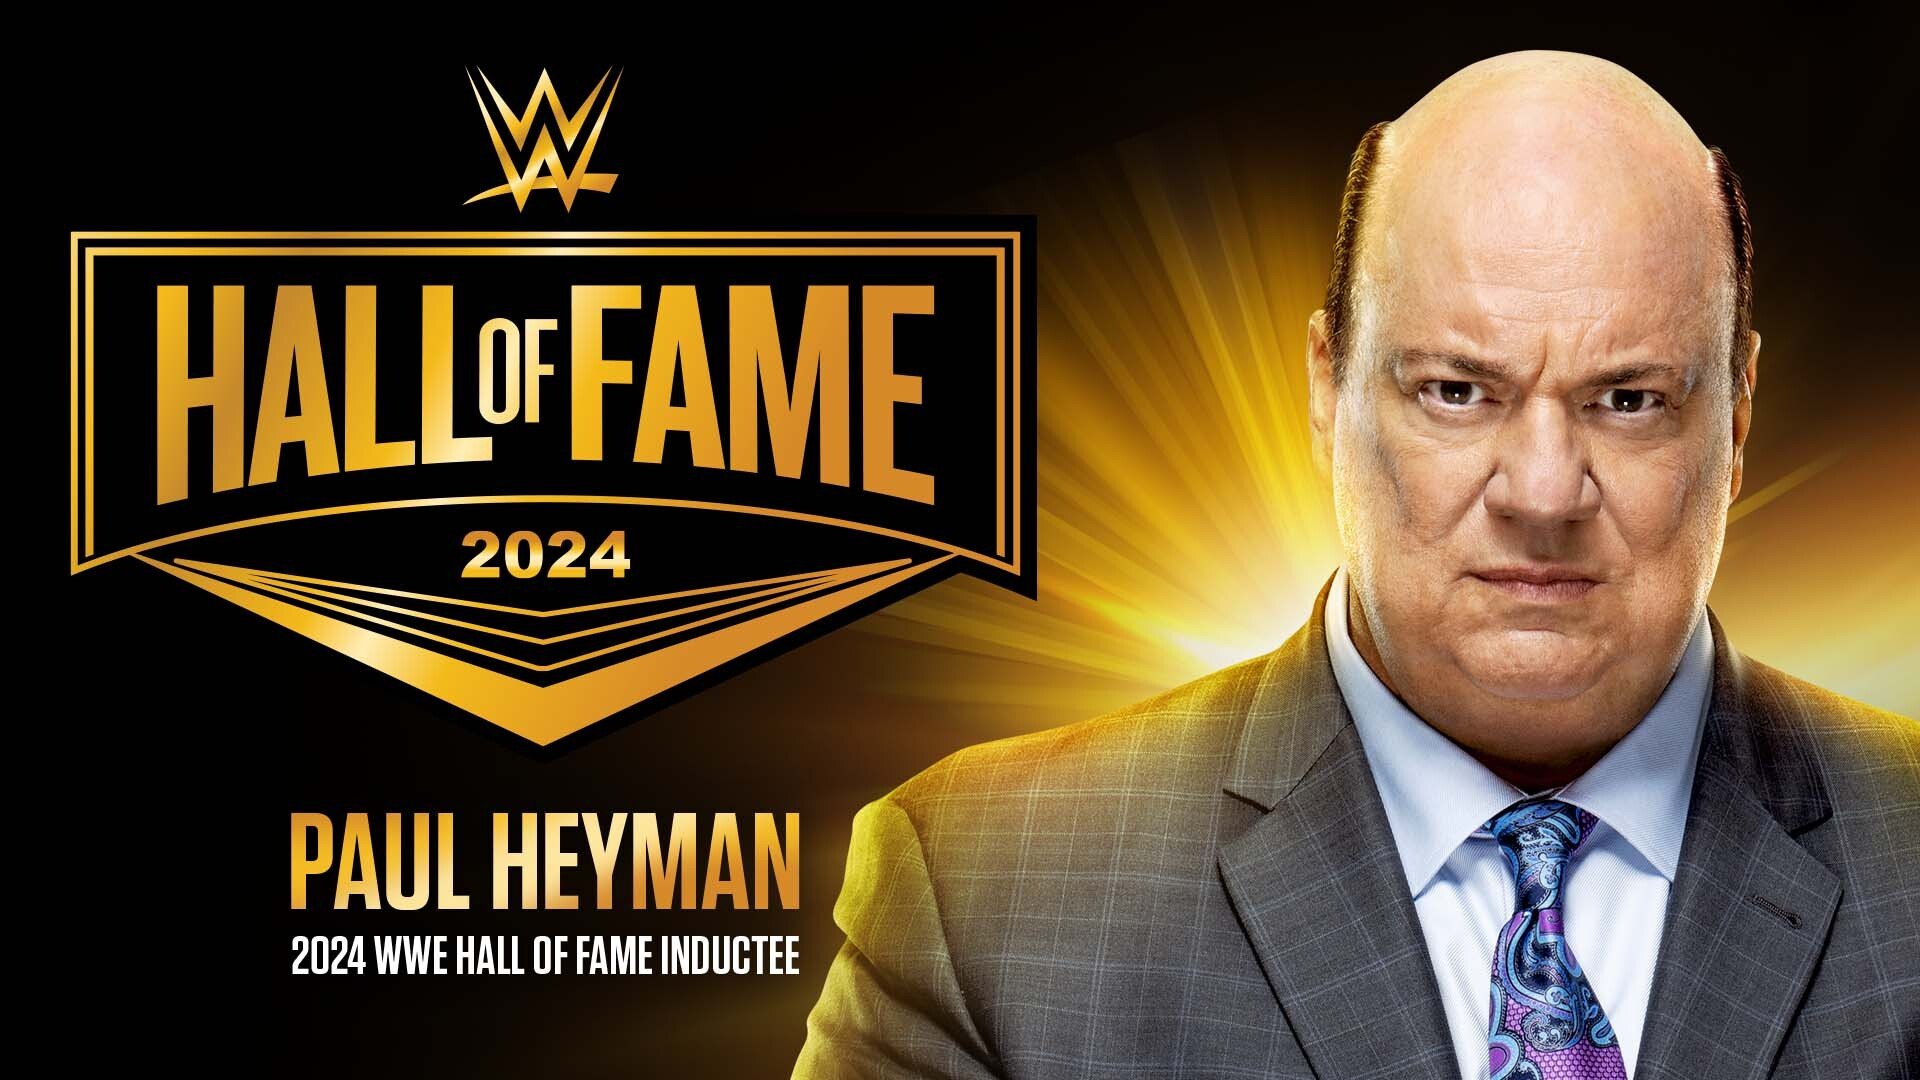 Roman Reigns, Bully Ray, and Tommy Dreamer share their thoughts on Paul Heyman’s induction into the WWE Hall of Fame.